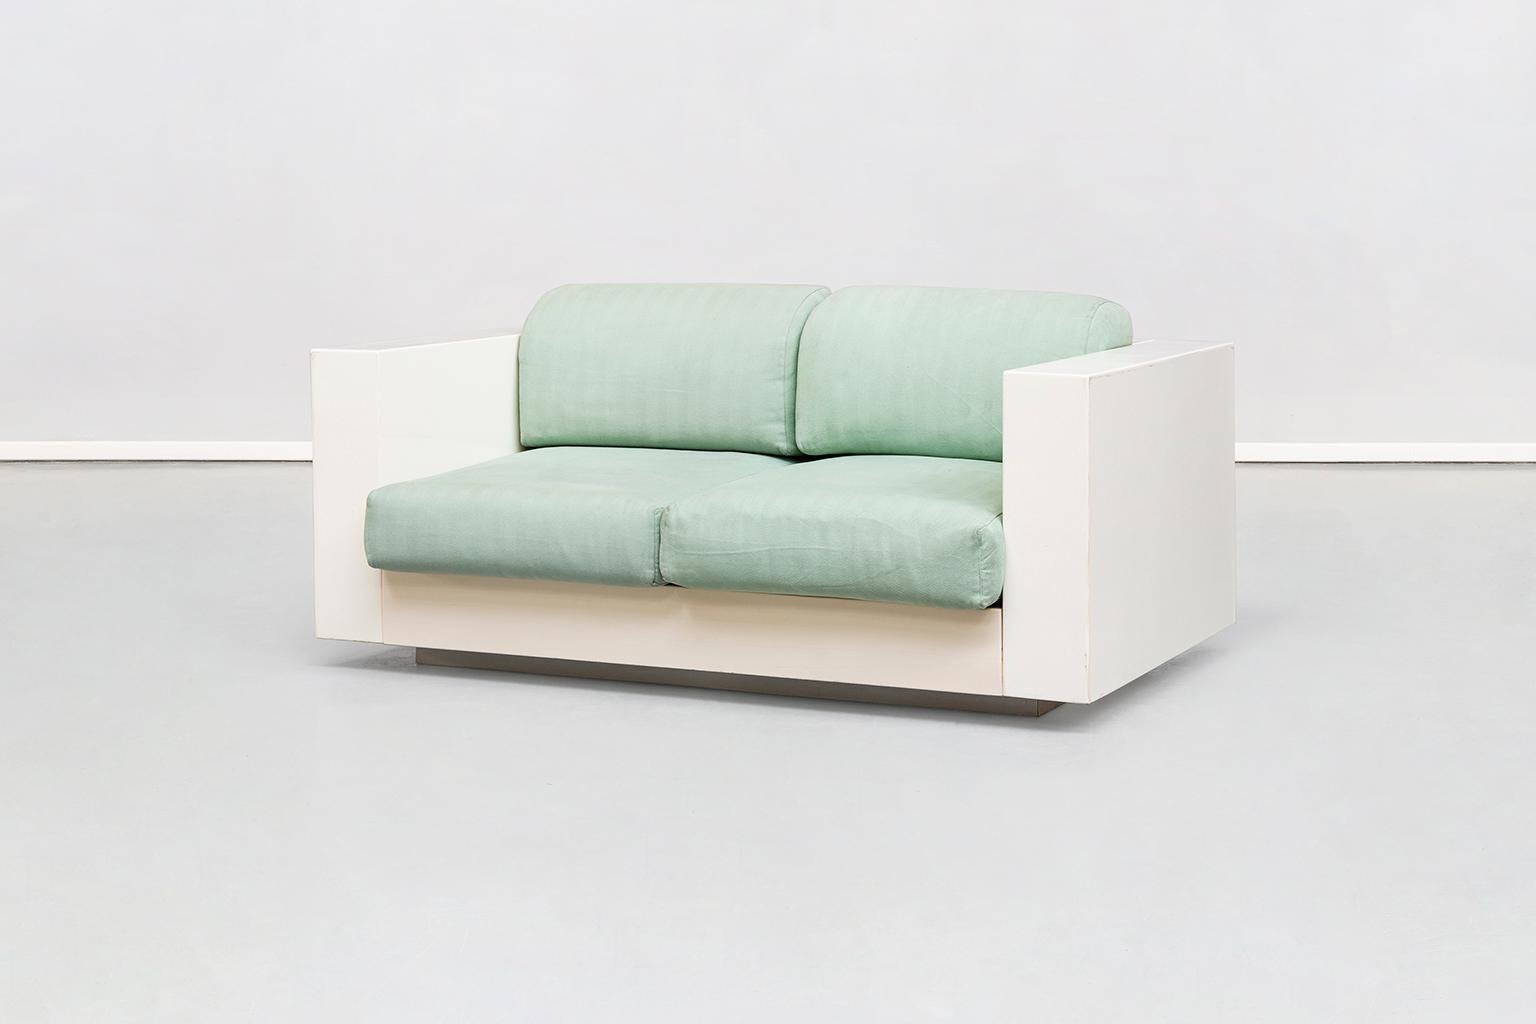 Italian two-seat Saratoga sofa, by Vignelli associates for Poltronova, 1964
Two-seater sofa with rigid structure, made by assembling four elements of equal thickness, with rounded corners, houses slightly protruding seat cushions. The desired